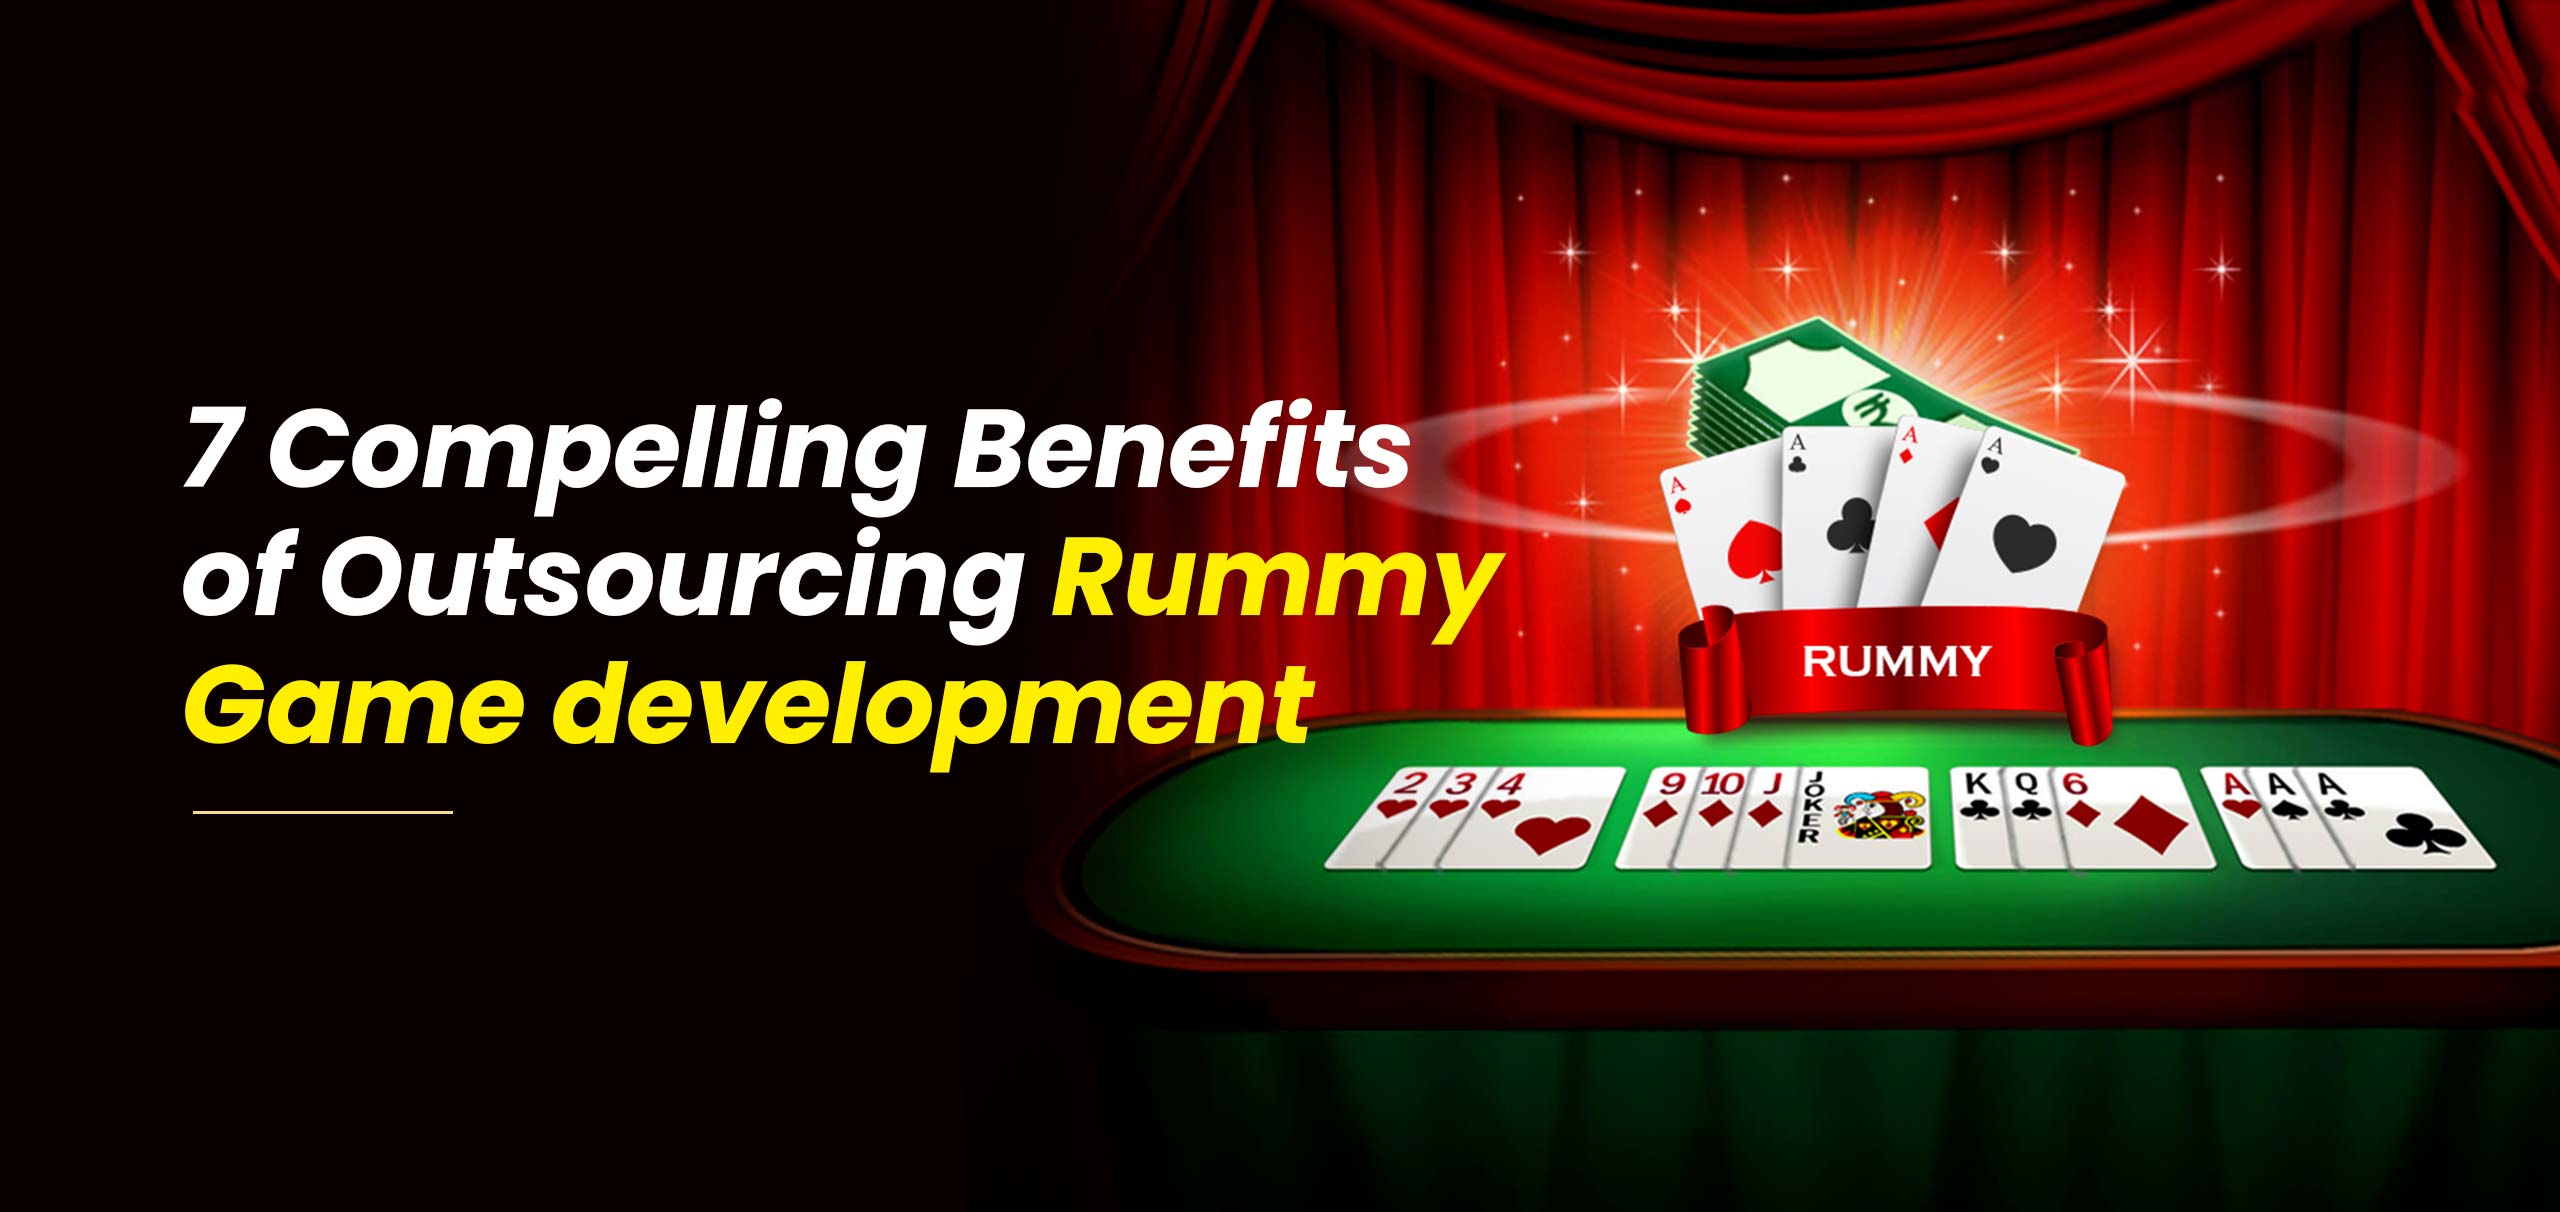 7-Compelling-Benefits-of-Outsourcing-Rummy-Game-development-1-c63f81e2